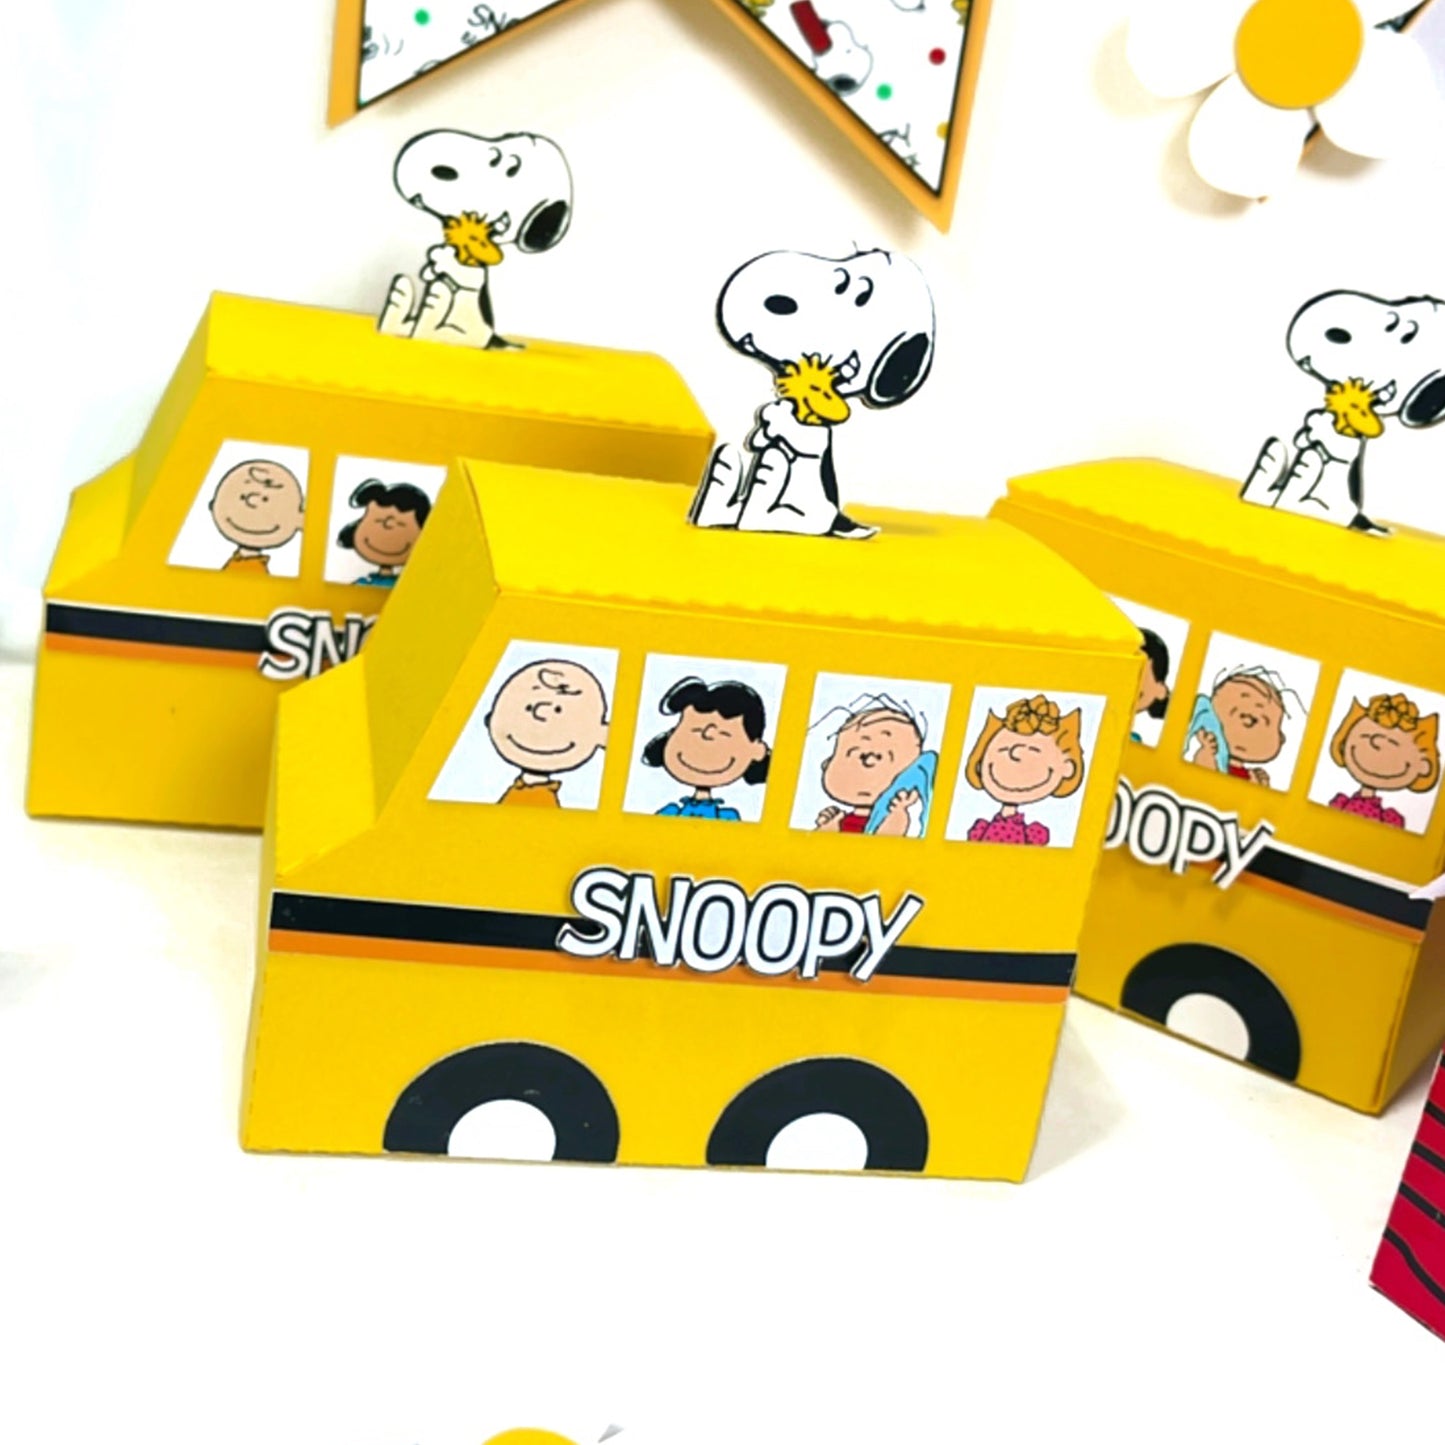 Snoopy Charlie brown peanuts, Party decor Snoopy, decor snoopy, Party decor , peanuts, Party decor Charlie brown peanuts